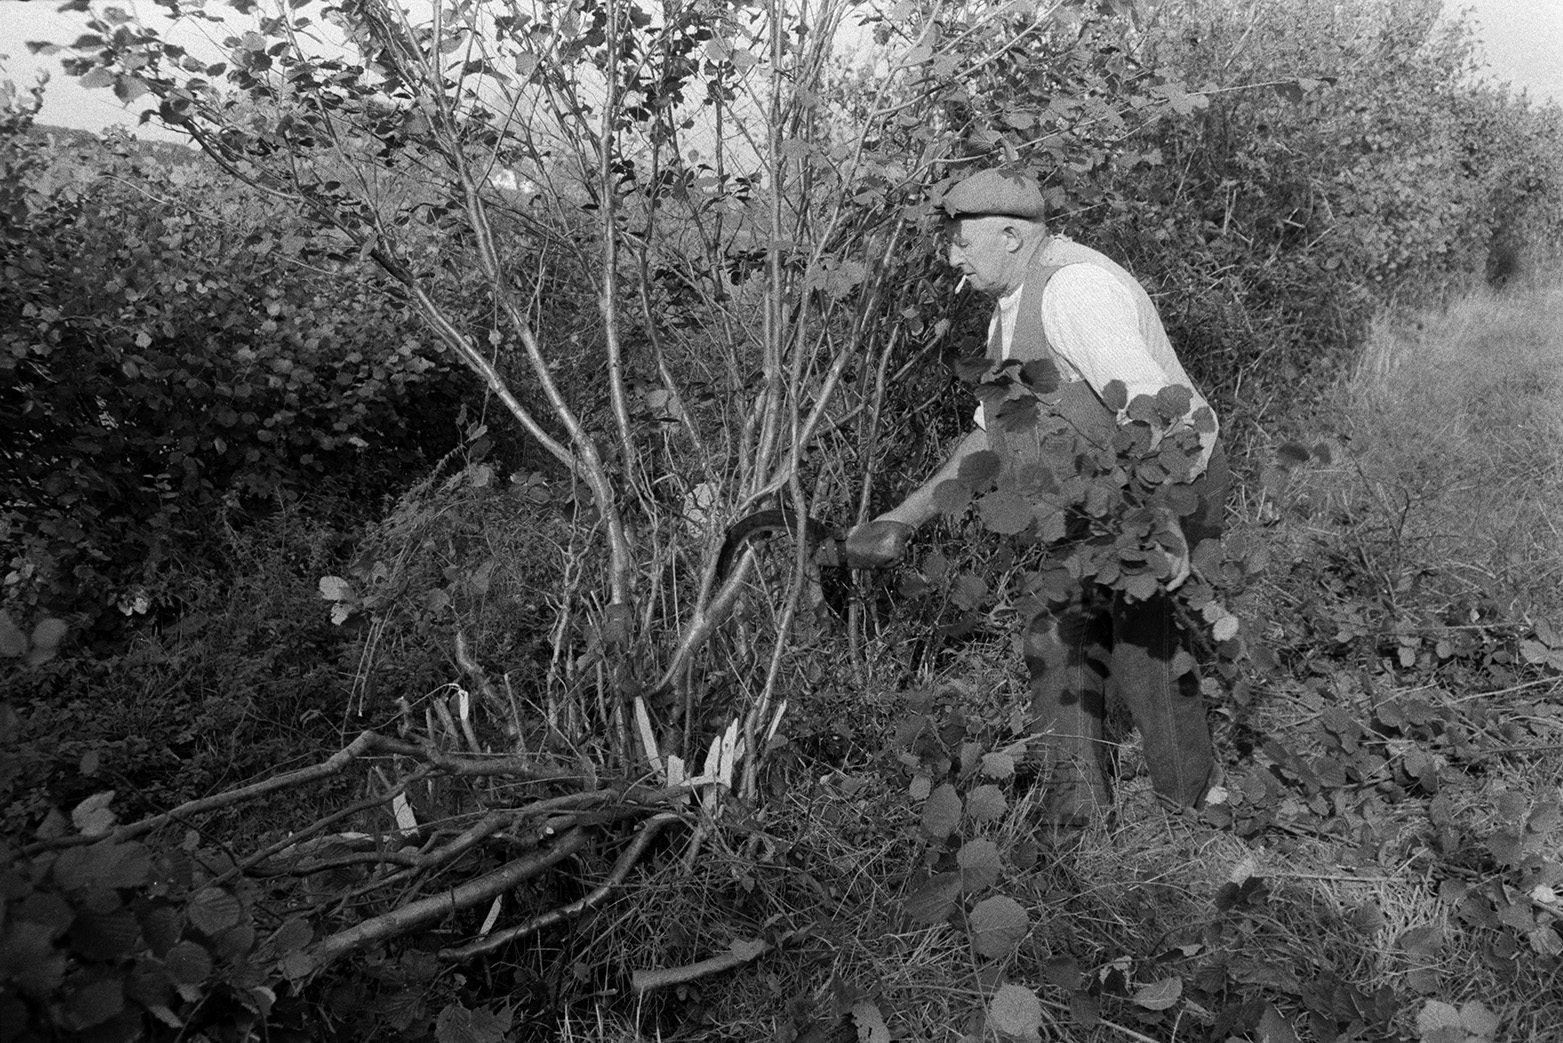 Tom Hooper laying a hedge in a field at Beaford. He is using a bill hook to cut the branches. He is also smoking a cigarette.